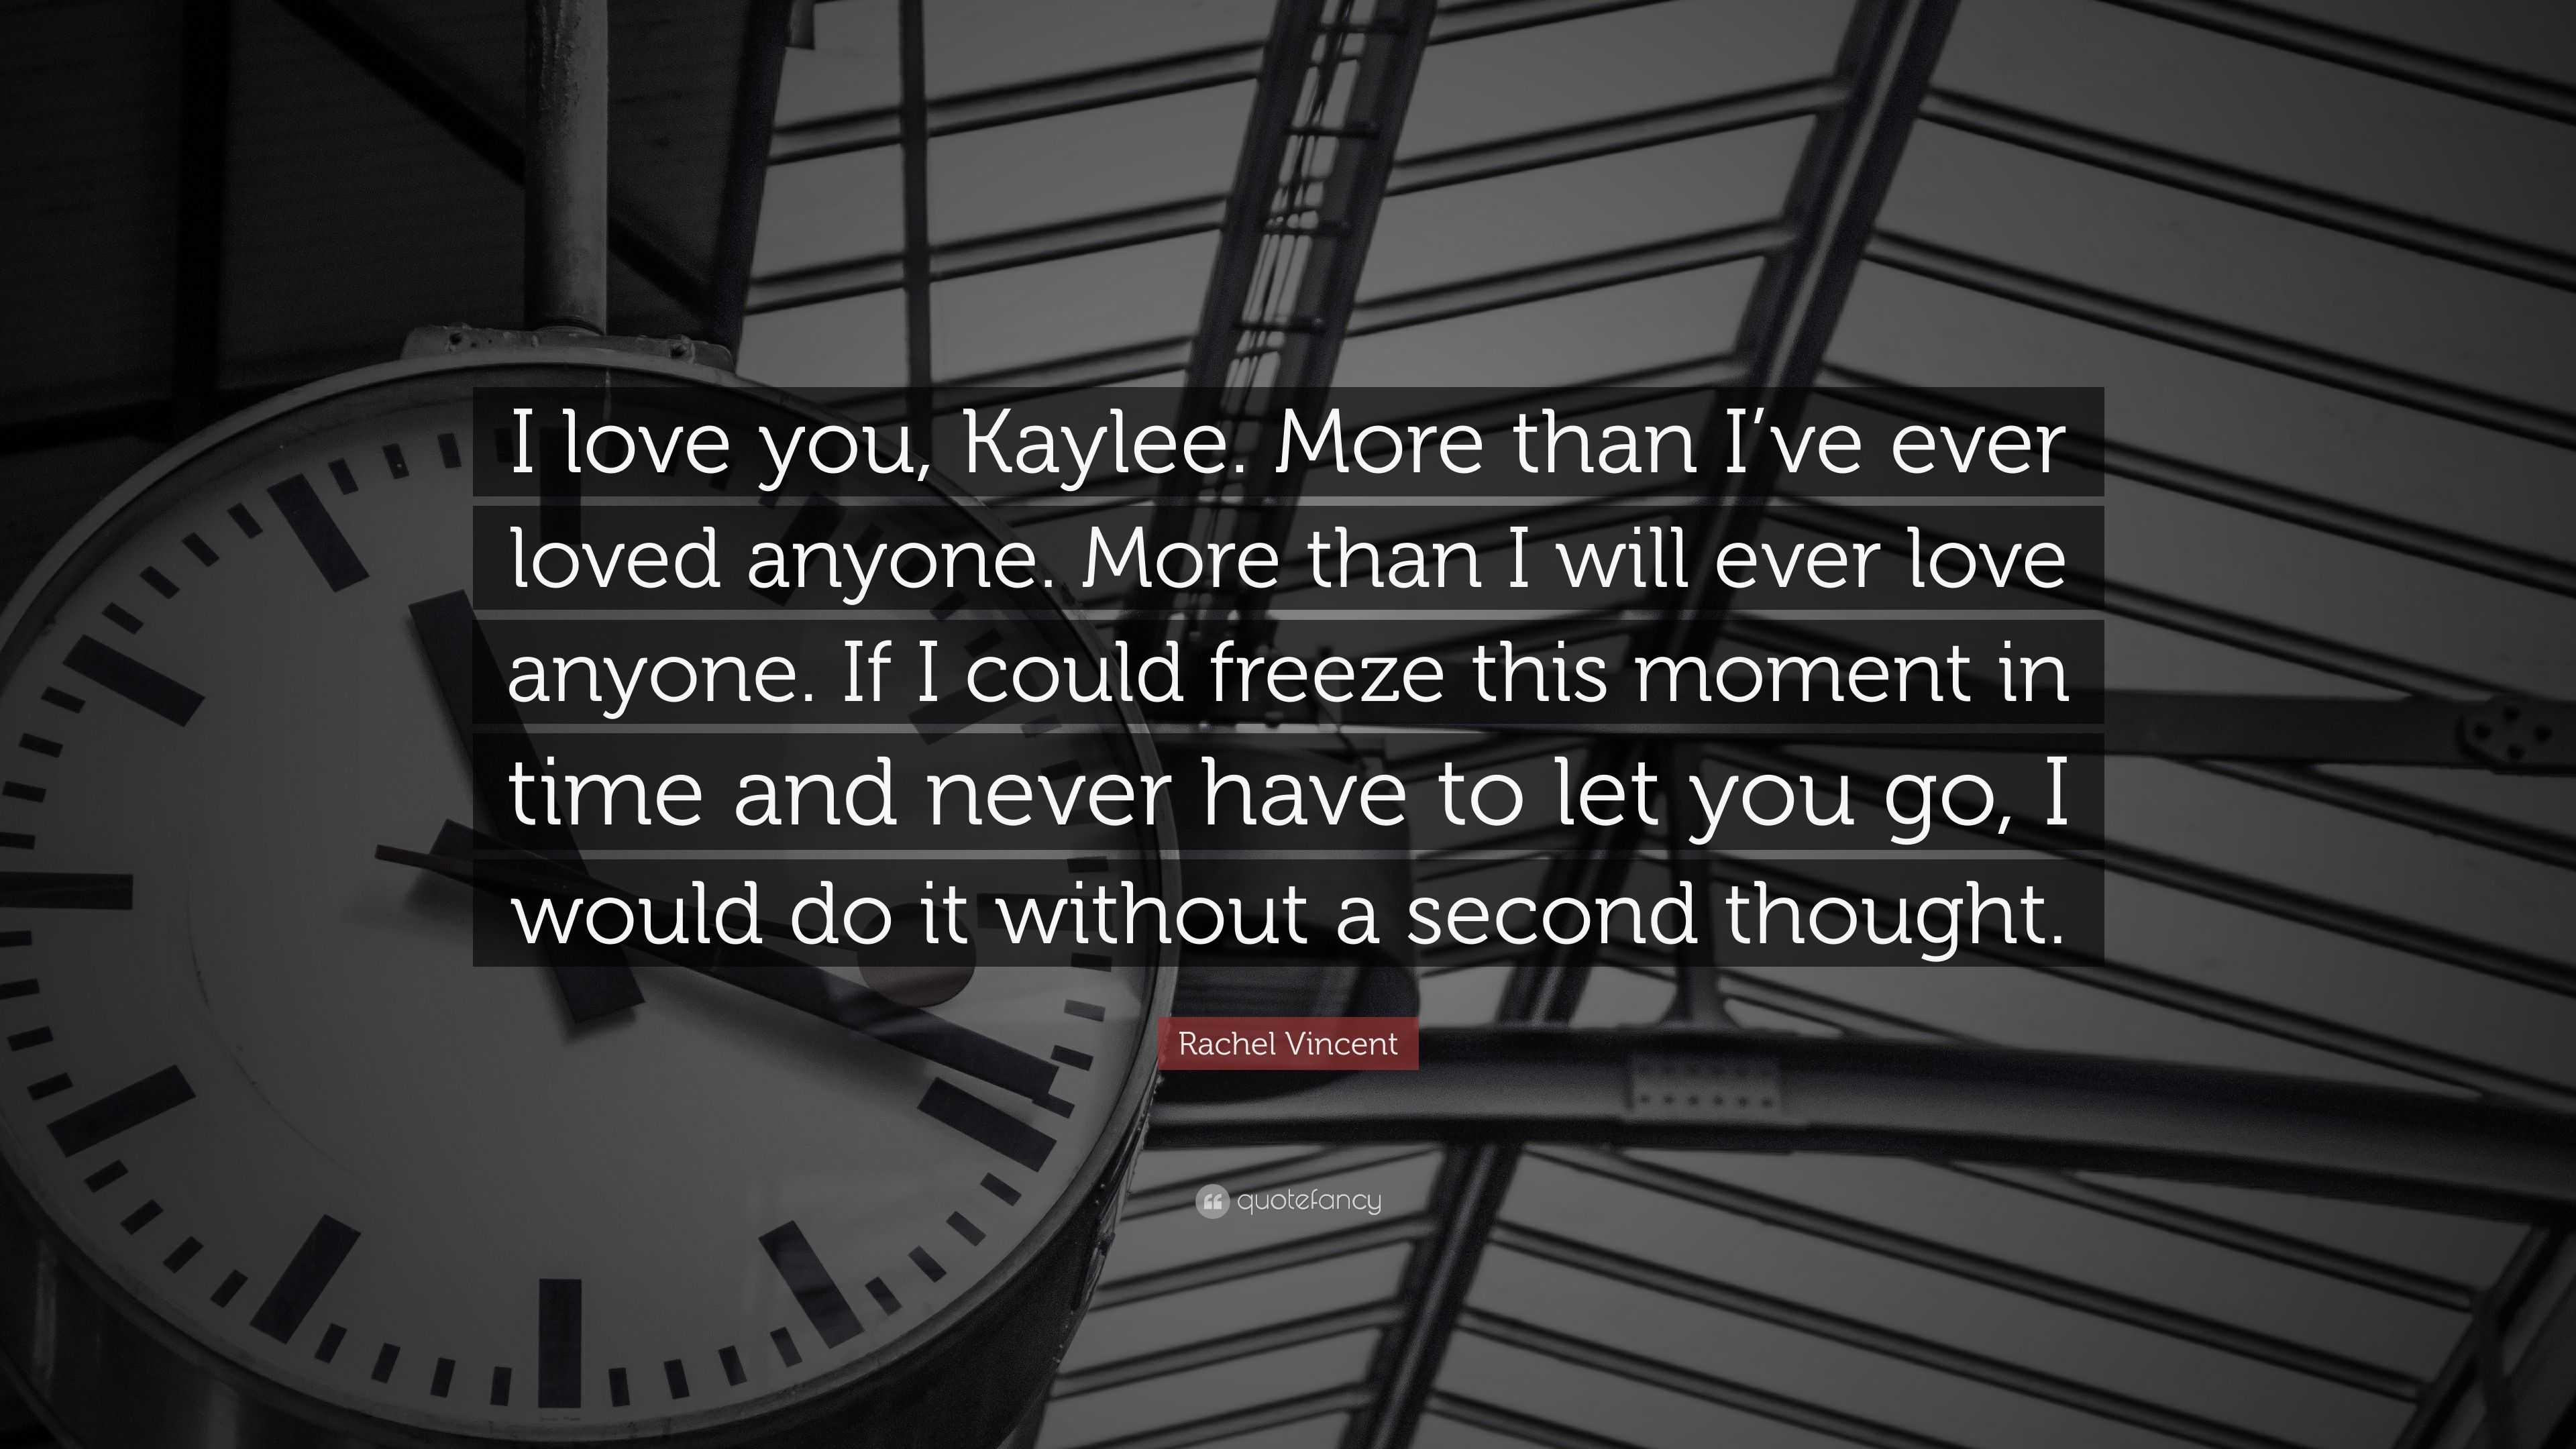 Rachel Vincent Quote I Love You Kaylee More Than I Ve Ever Loved Anyone More Than I Will Ever Love Anyone If I Could Freeze This Moment I